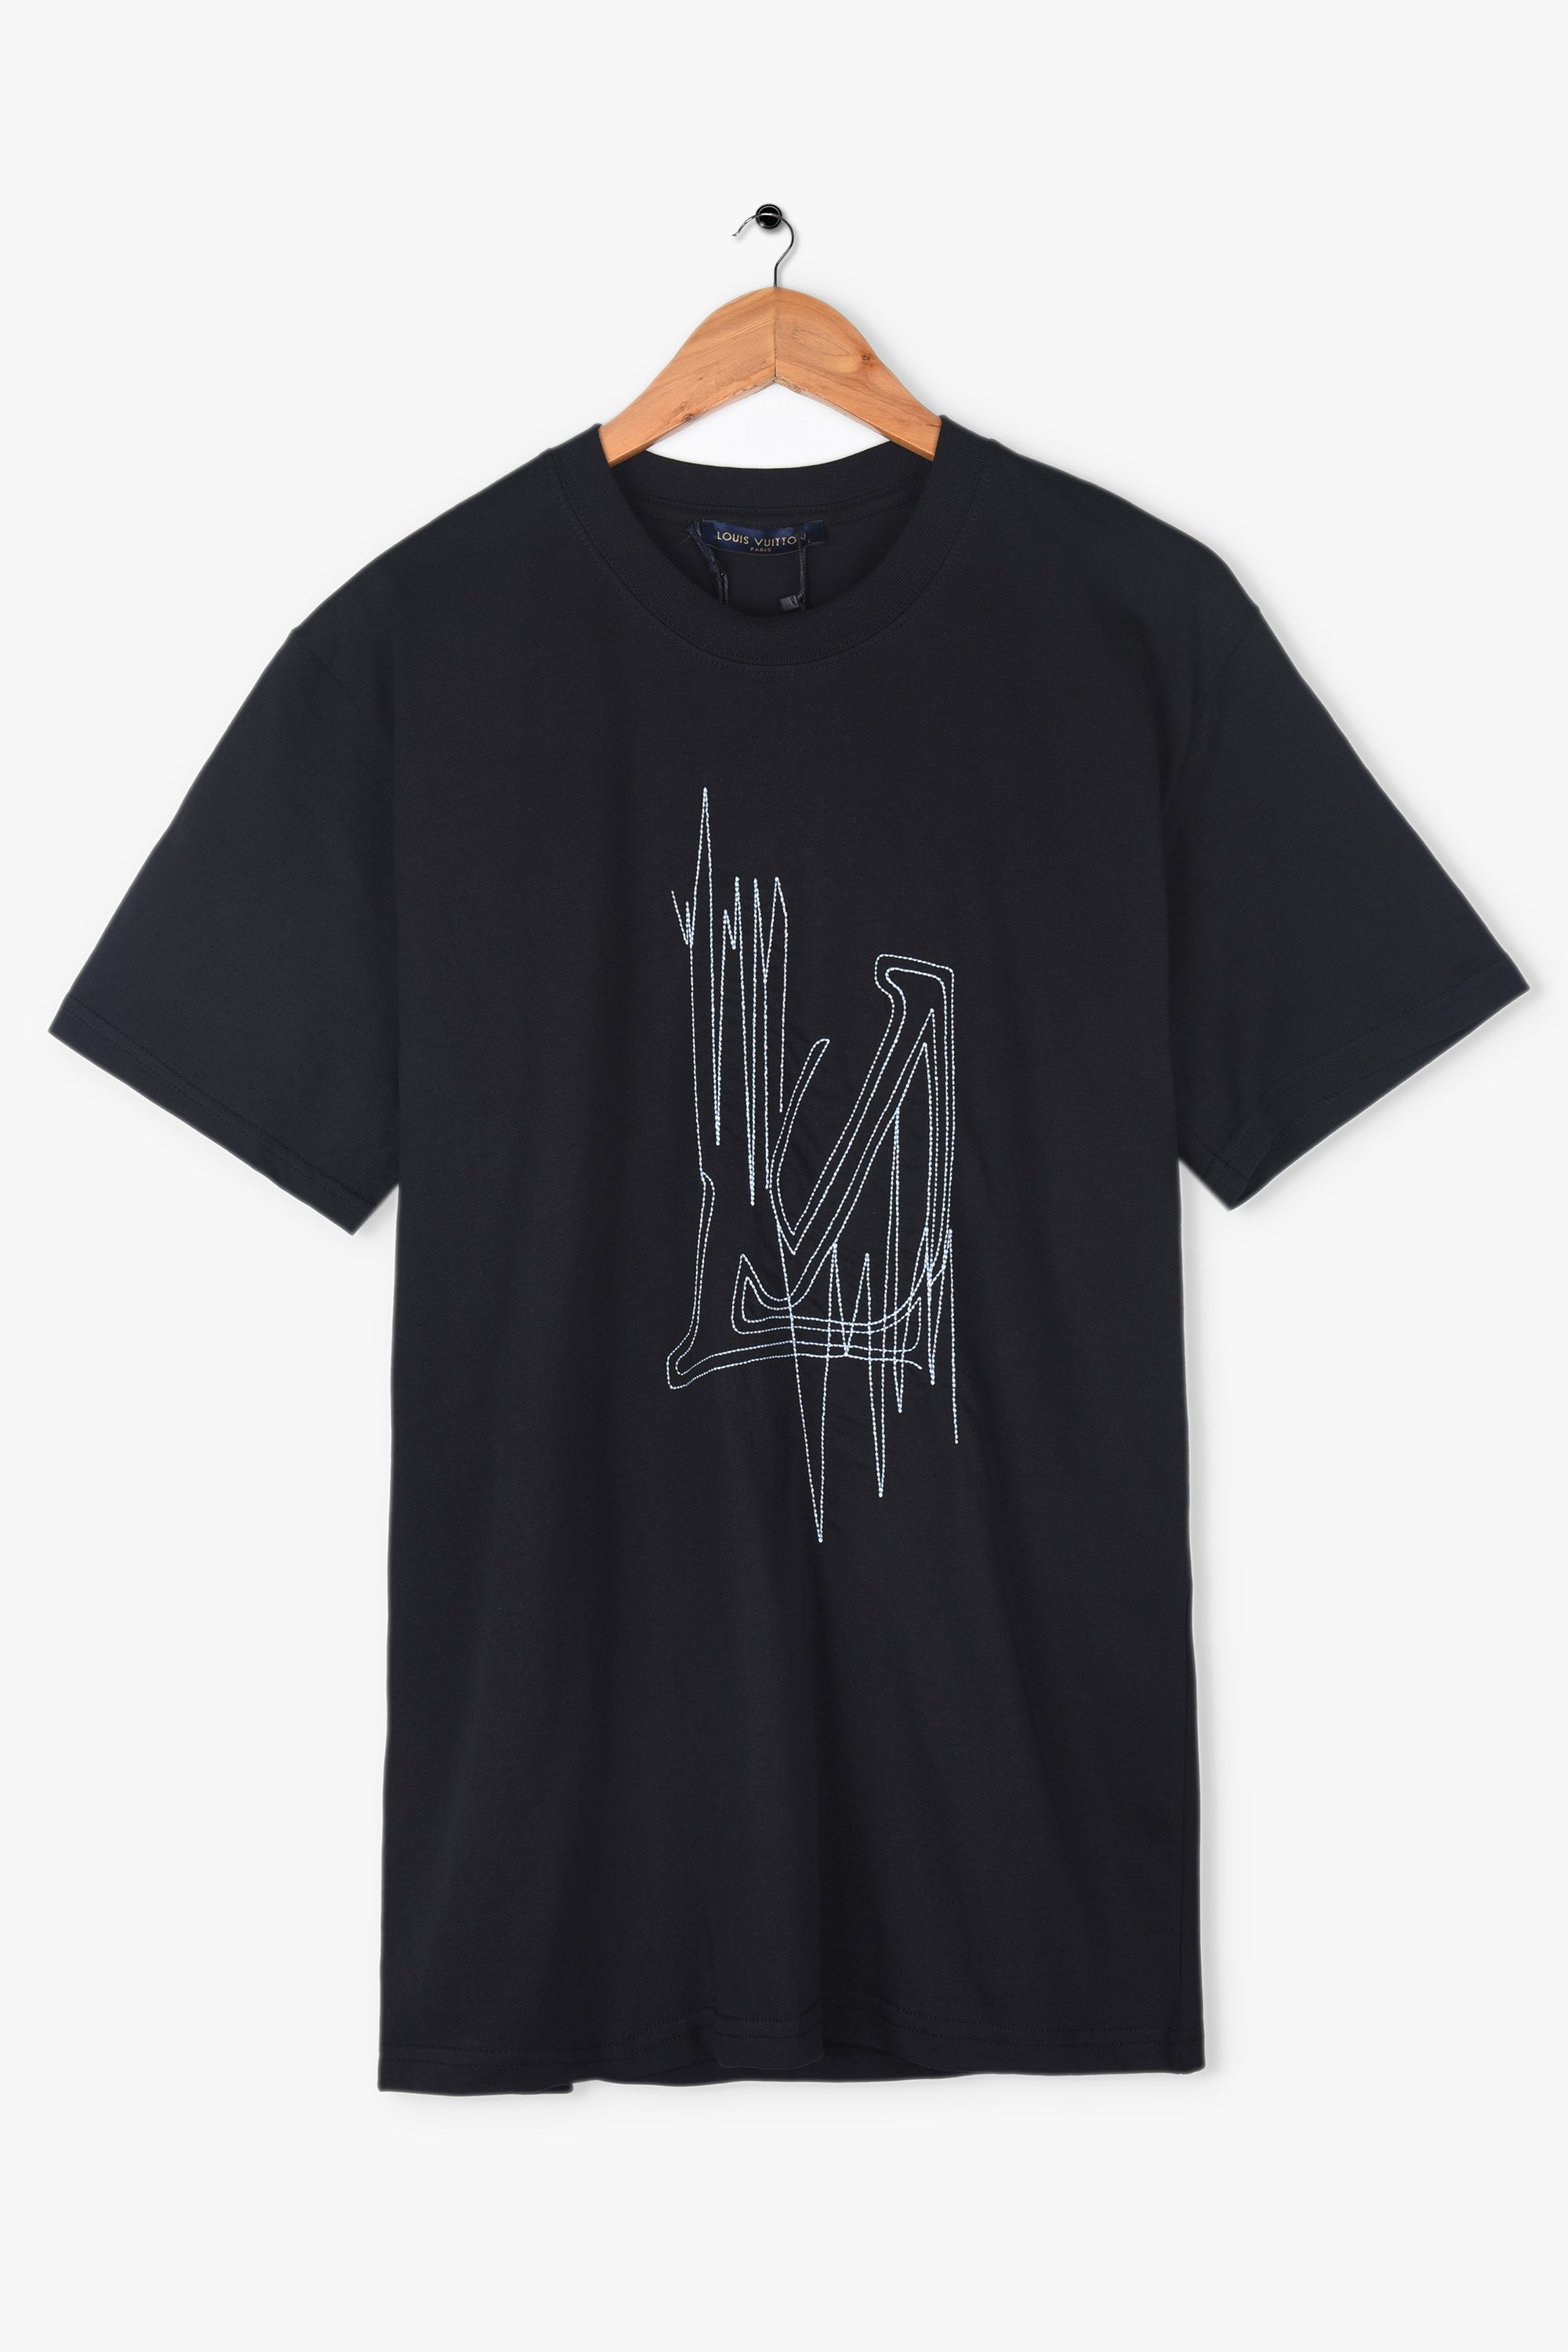 LV FREQUENCY TEE IN BLACK